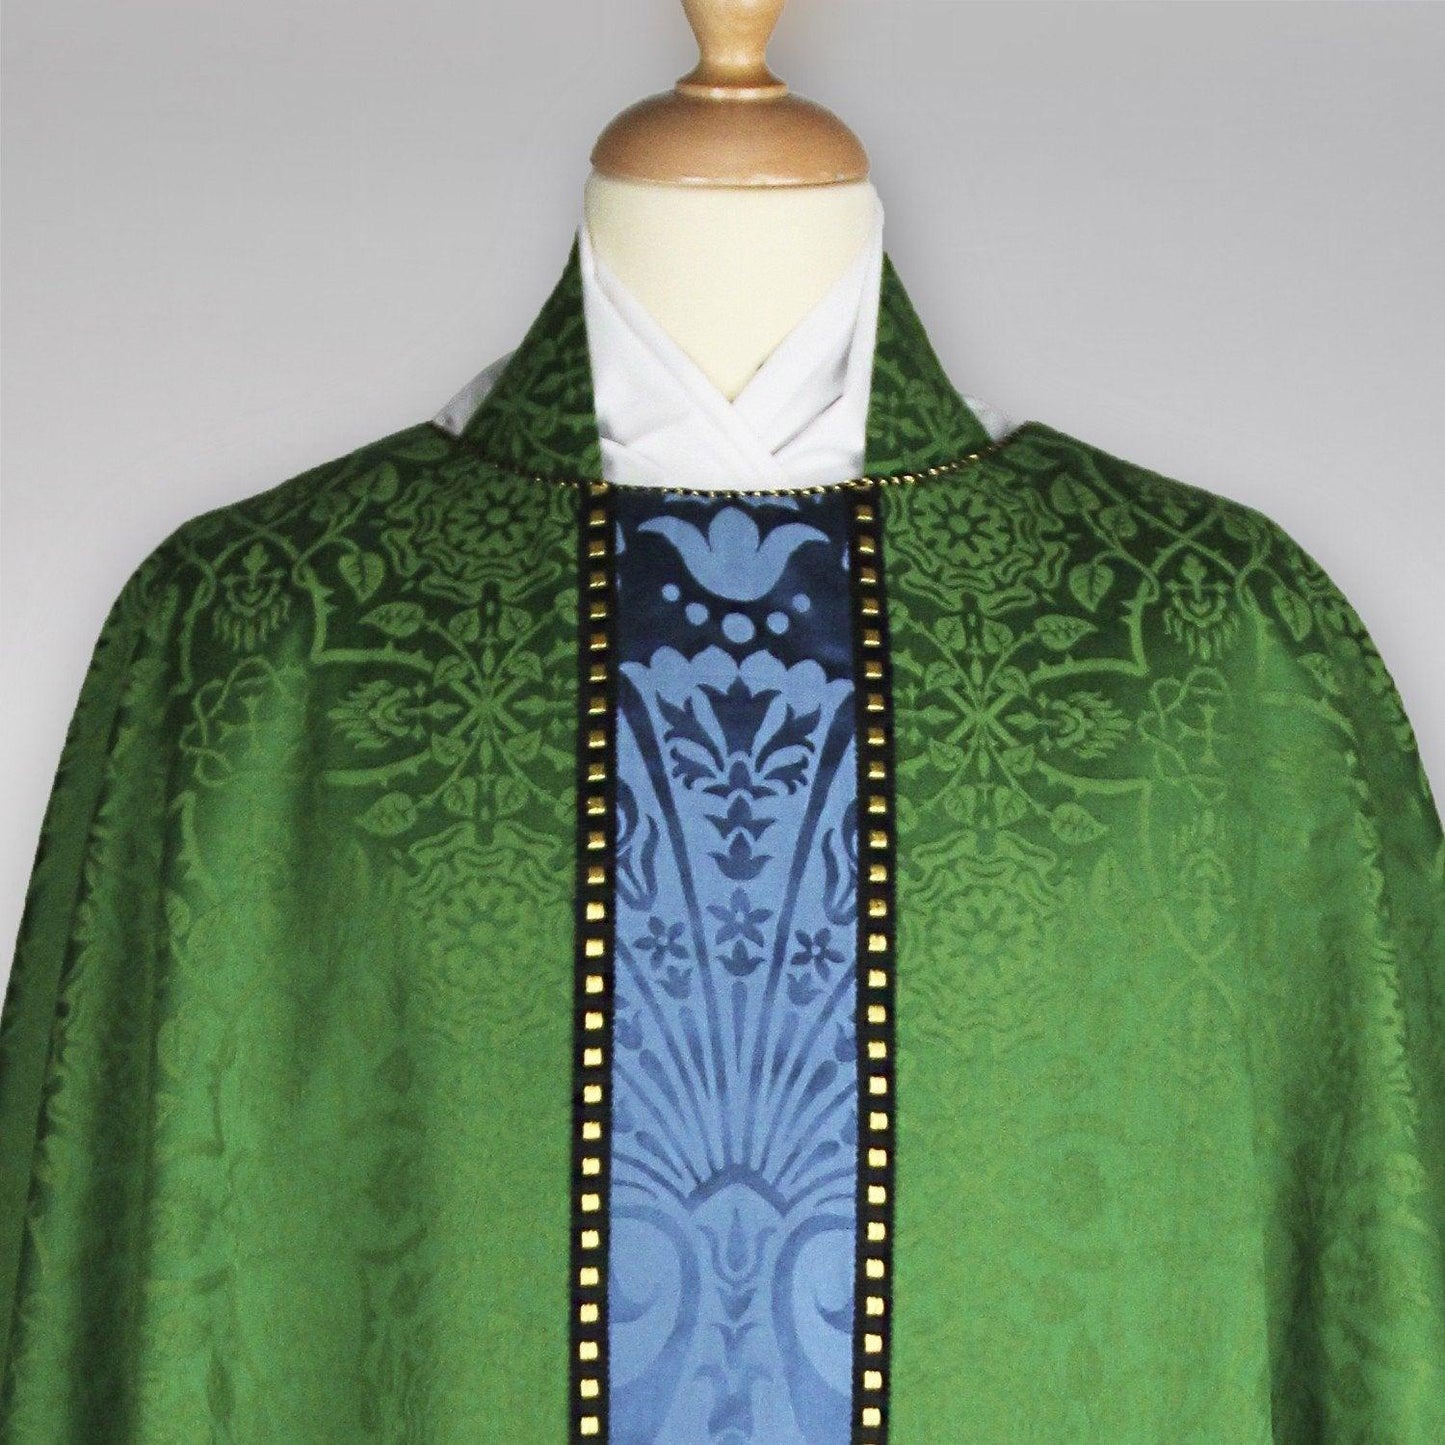 Classic style, Green Glastonbury Chasuble with blue orphreys - Watts & Co.